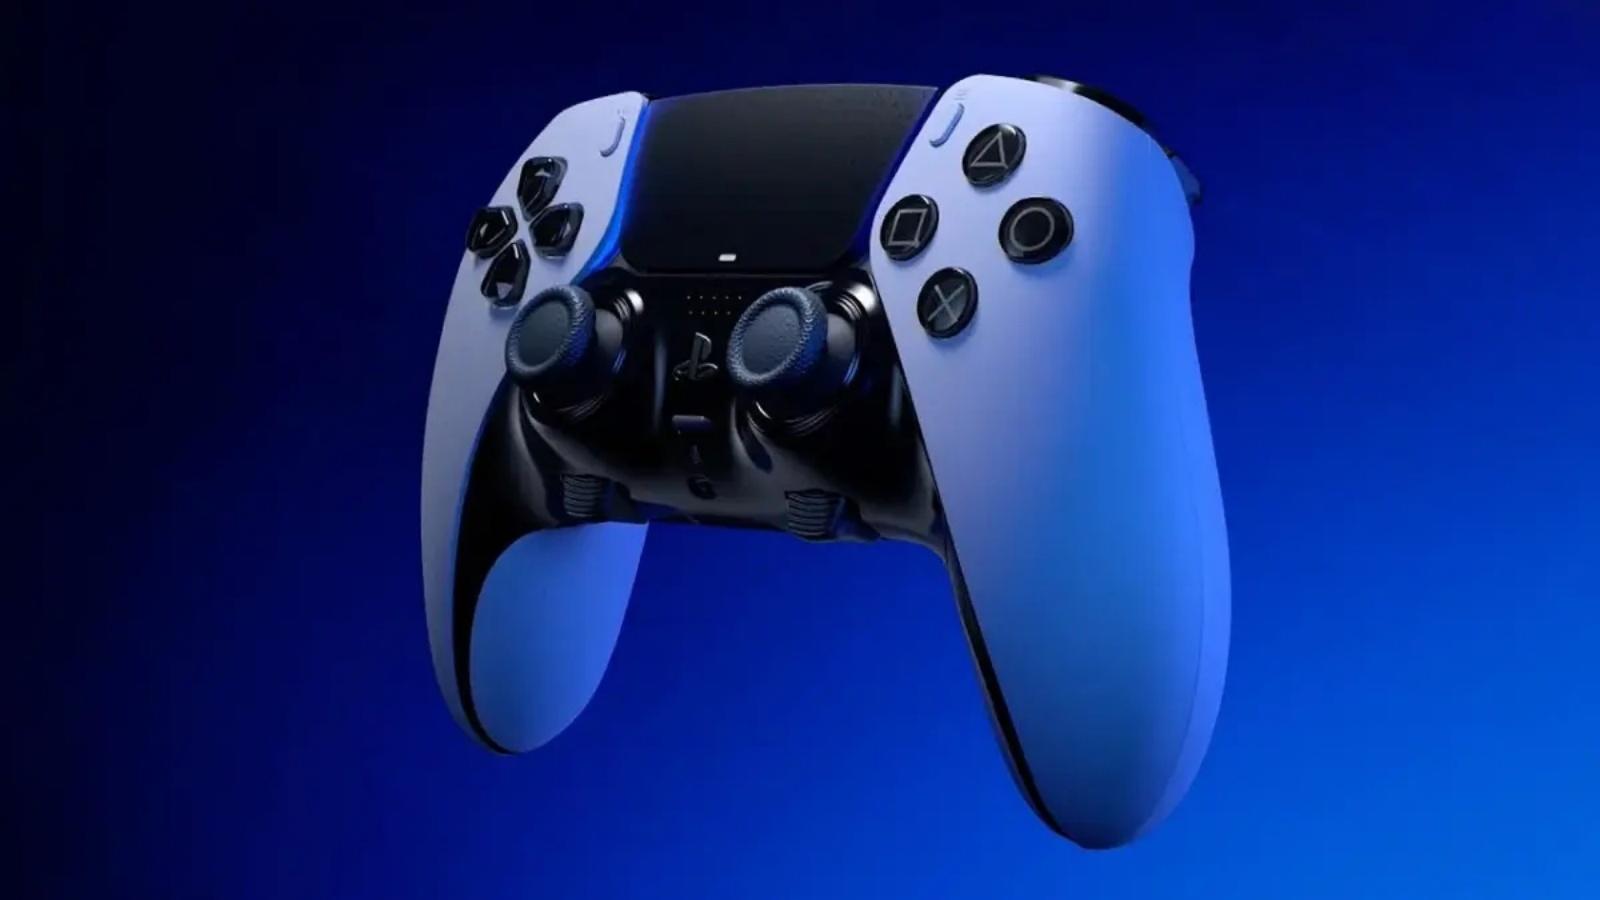 PS5 Slim / PS5 Pro could arrive in June during PlayStation Showcase